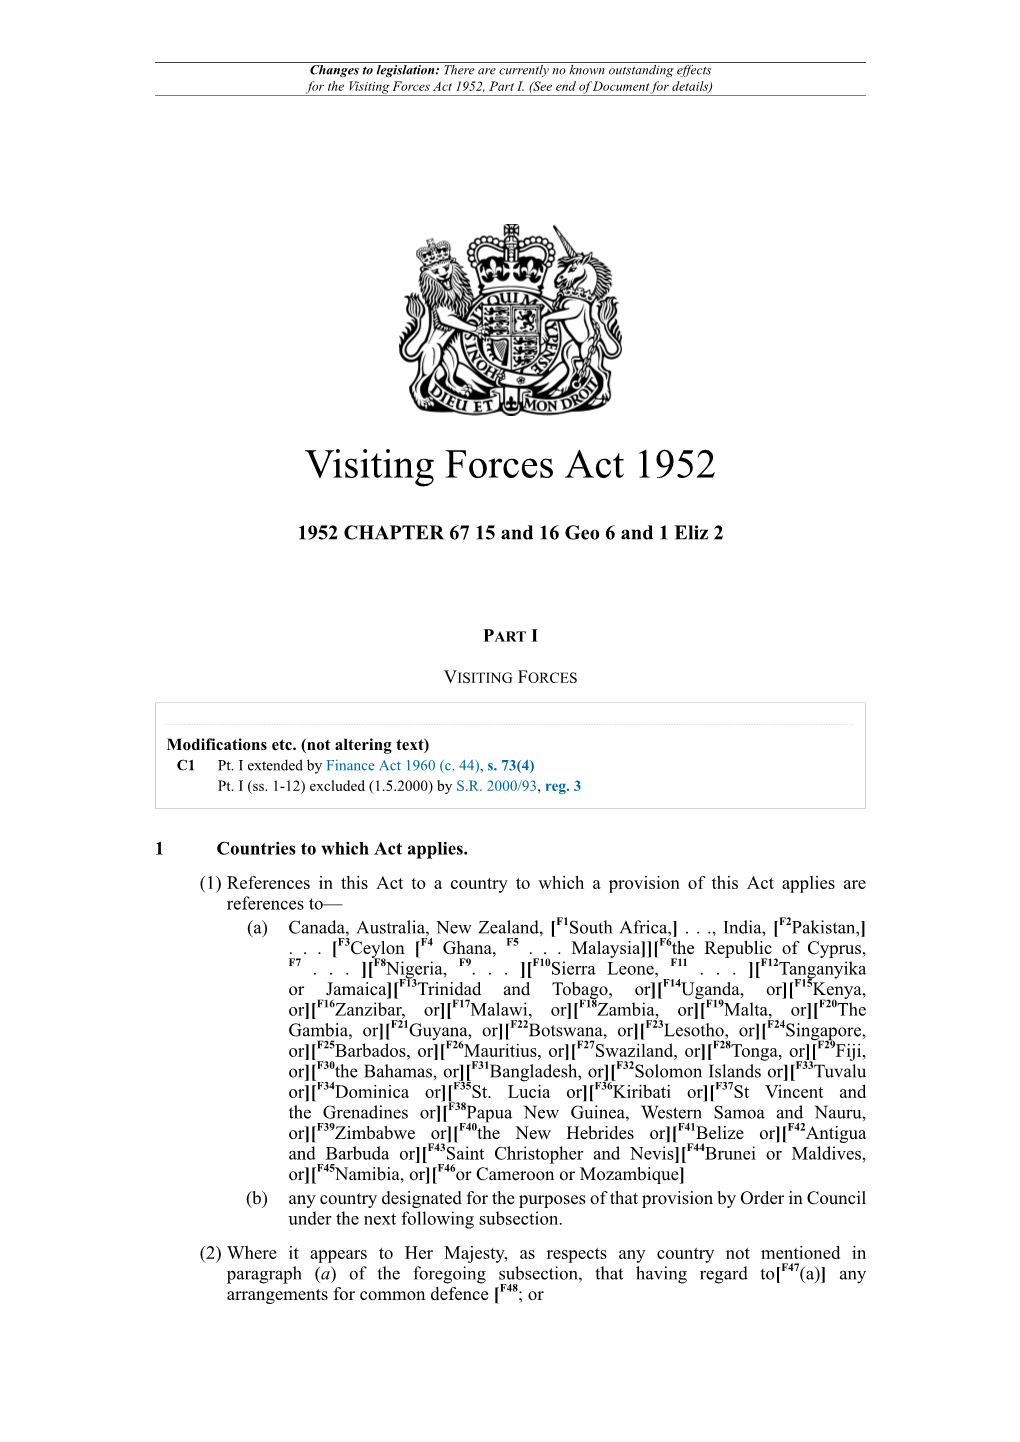 Visiting Forces Act 1952, Part I